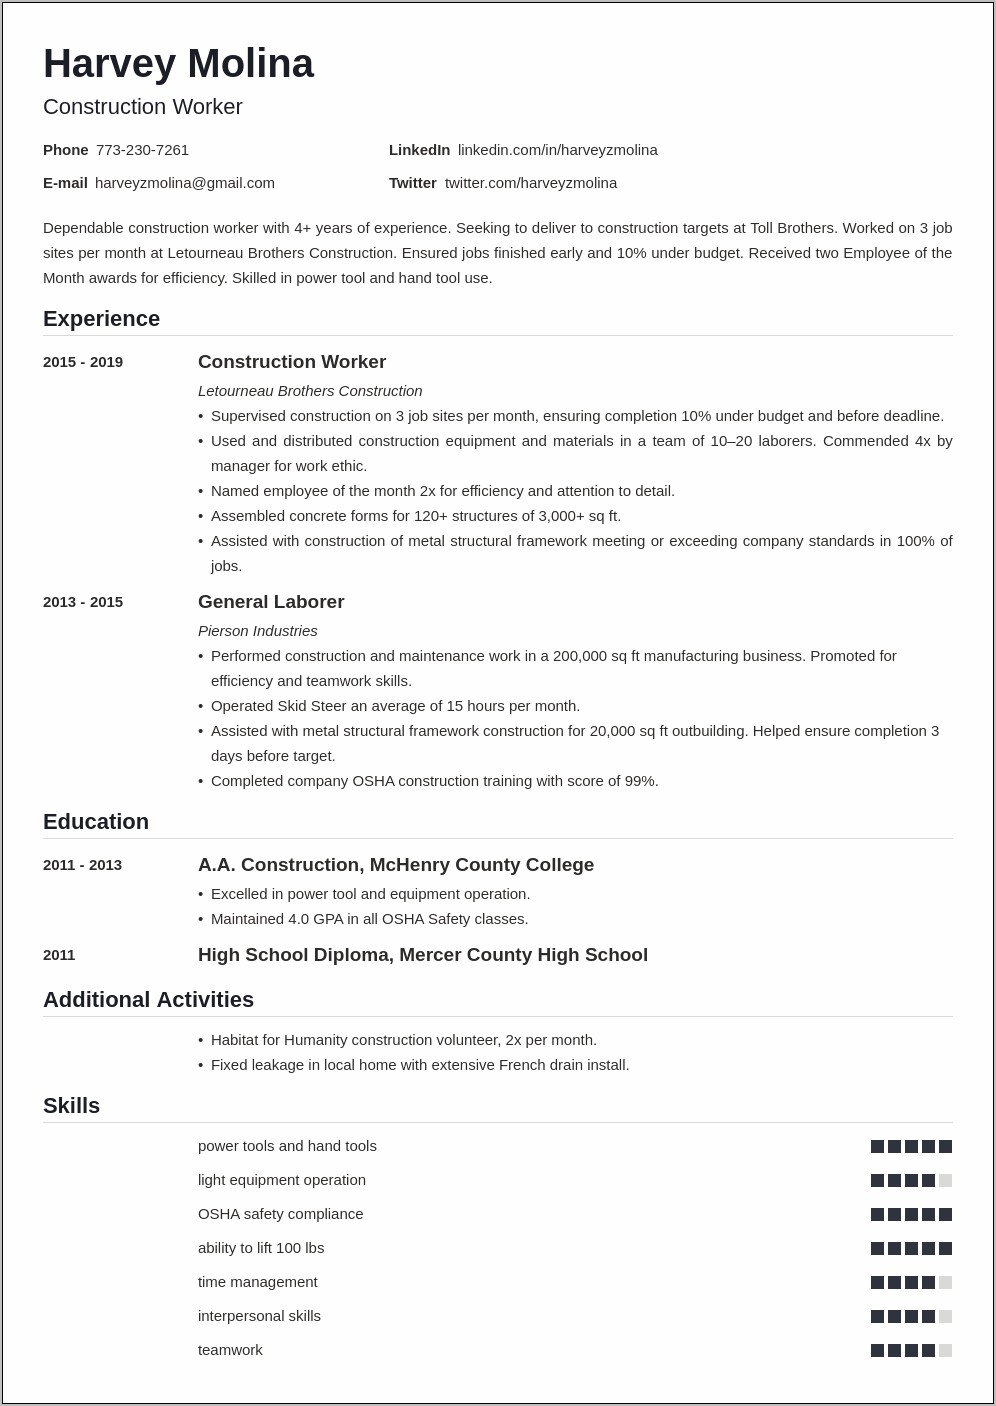 Construction Worker Jobs On Resume